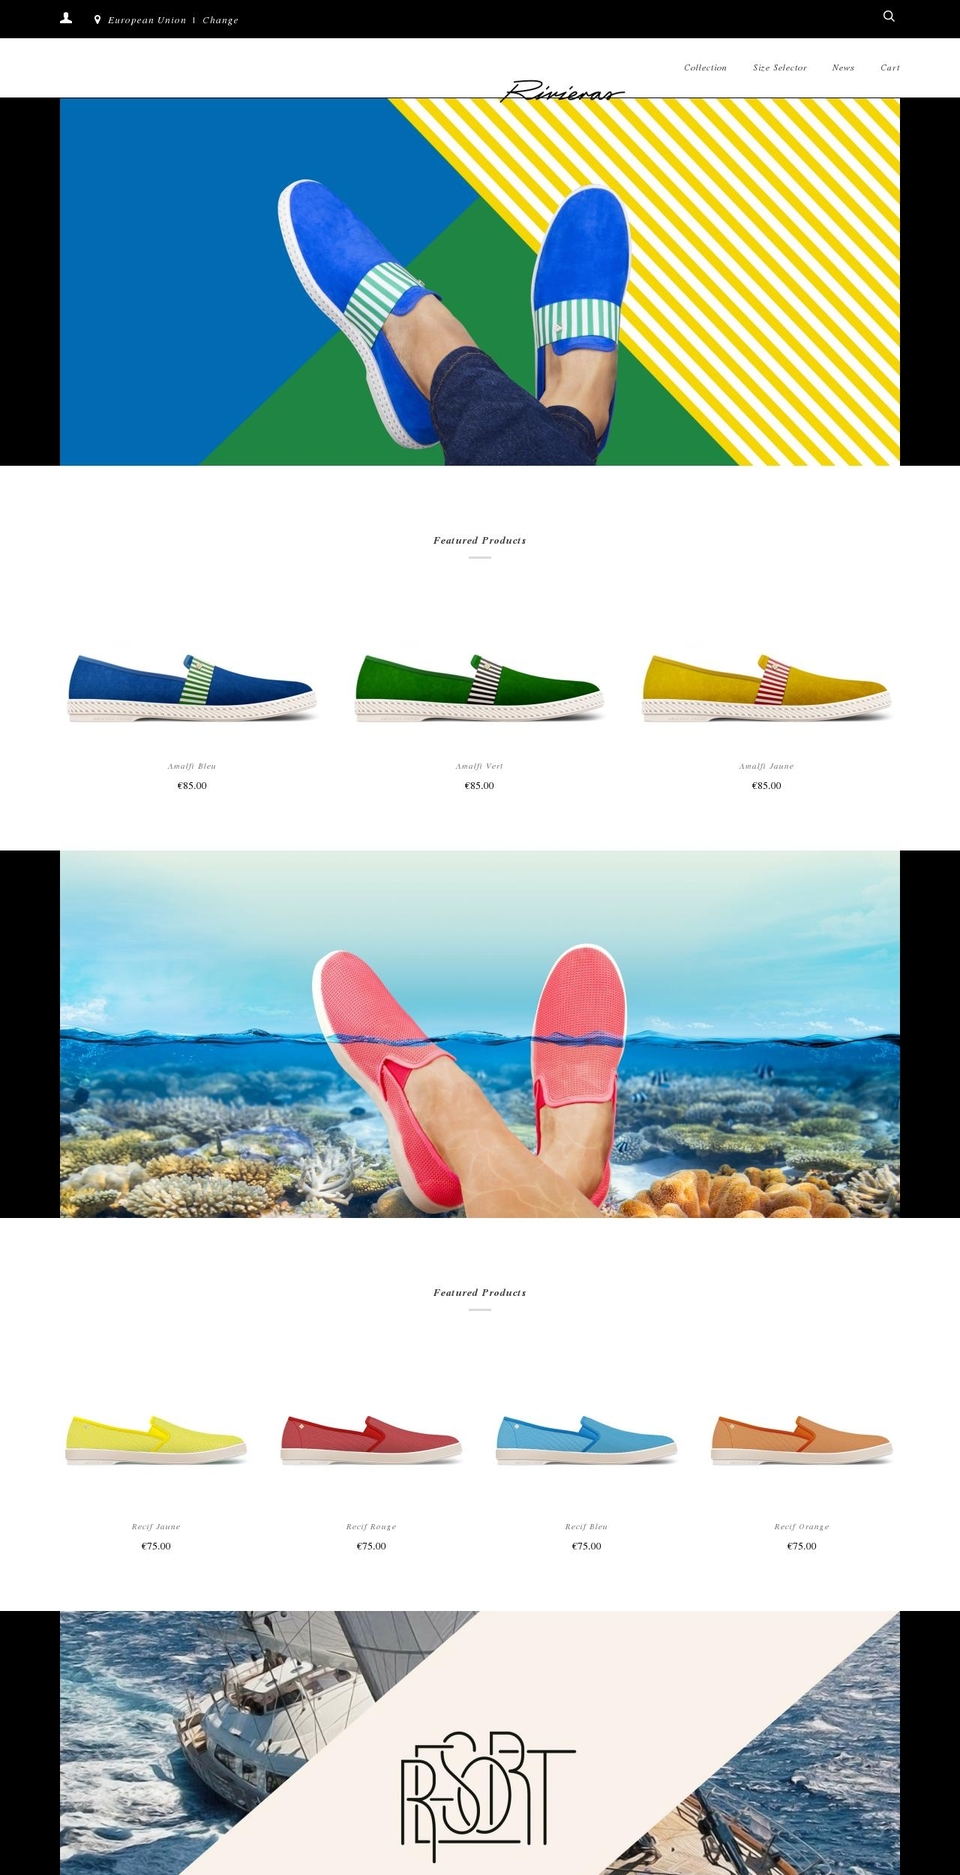 Rivieras [Plus]-TH-July-30-2018 Shopify theme site example rivieras-resort.fr